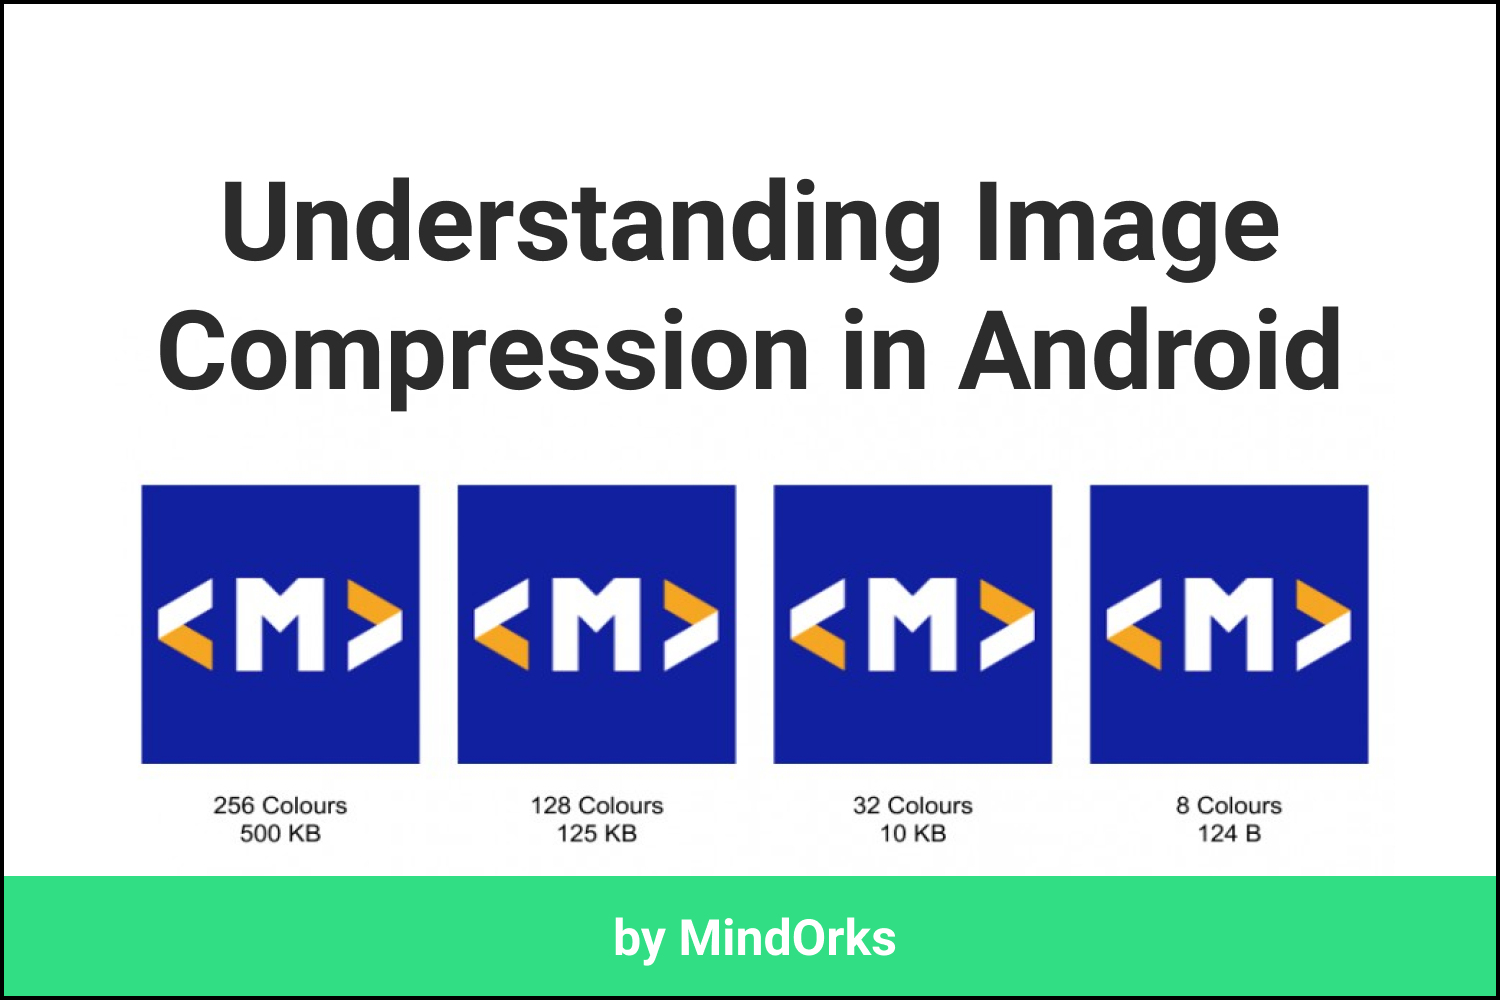 Understanding Image compression in Android